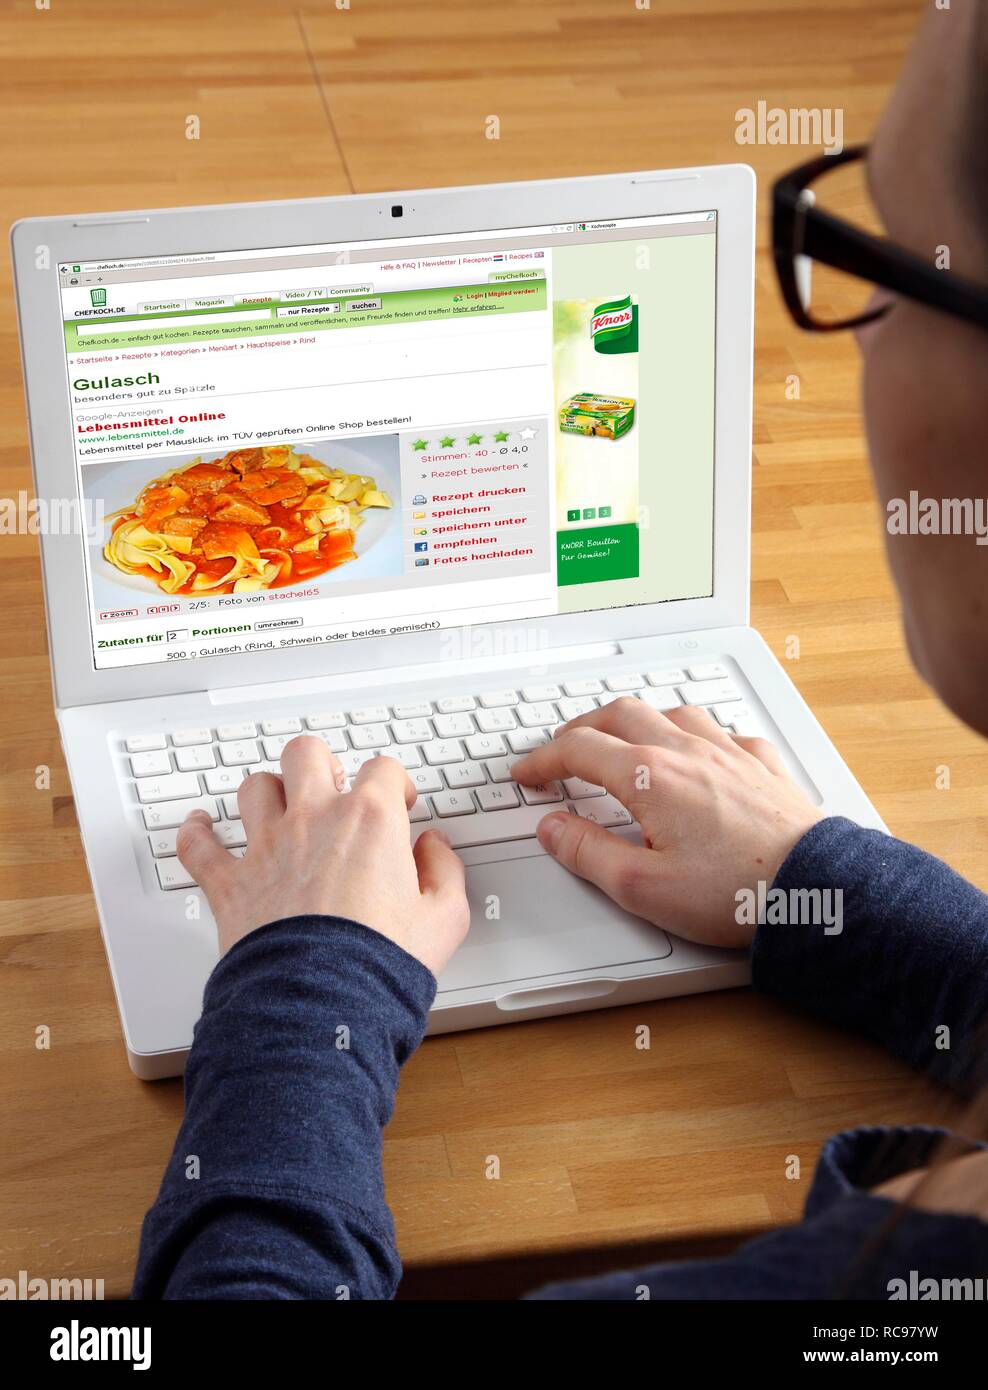 Woman surfing the internet with a laptop, online recipes, Chefkoch.de Stock Photo